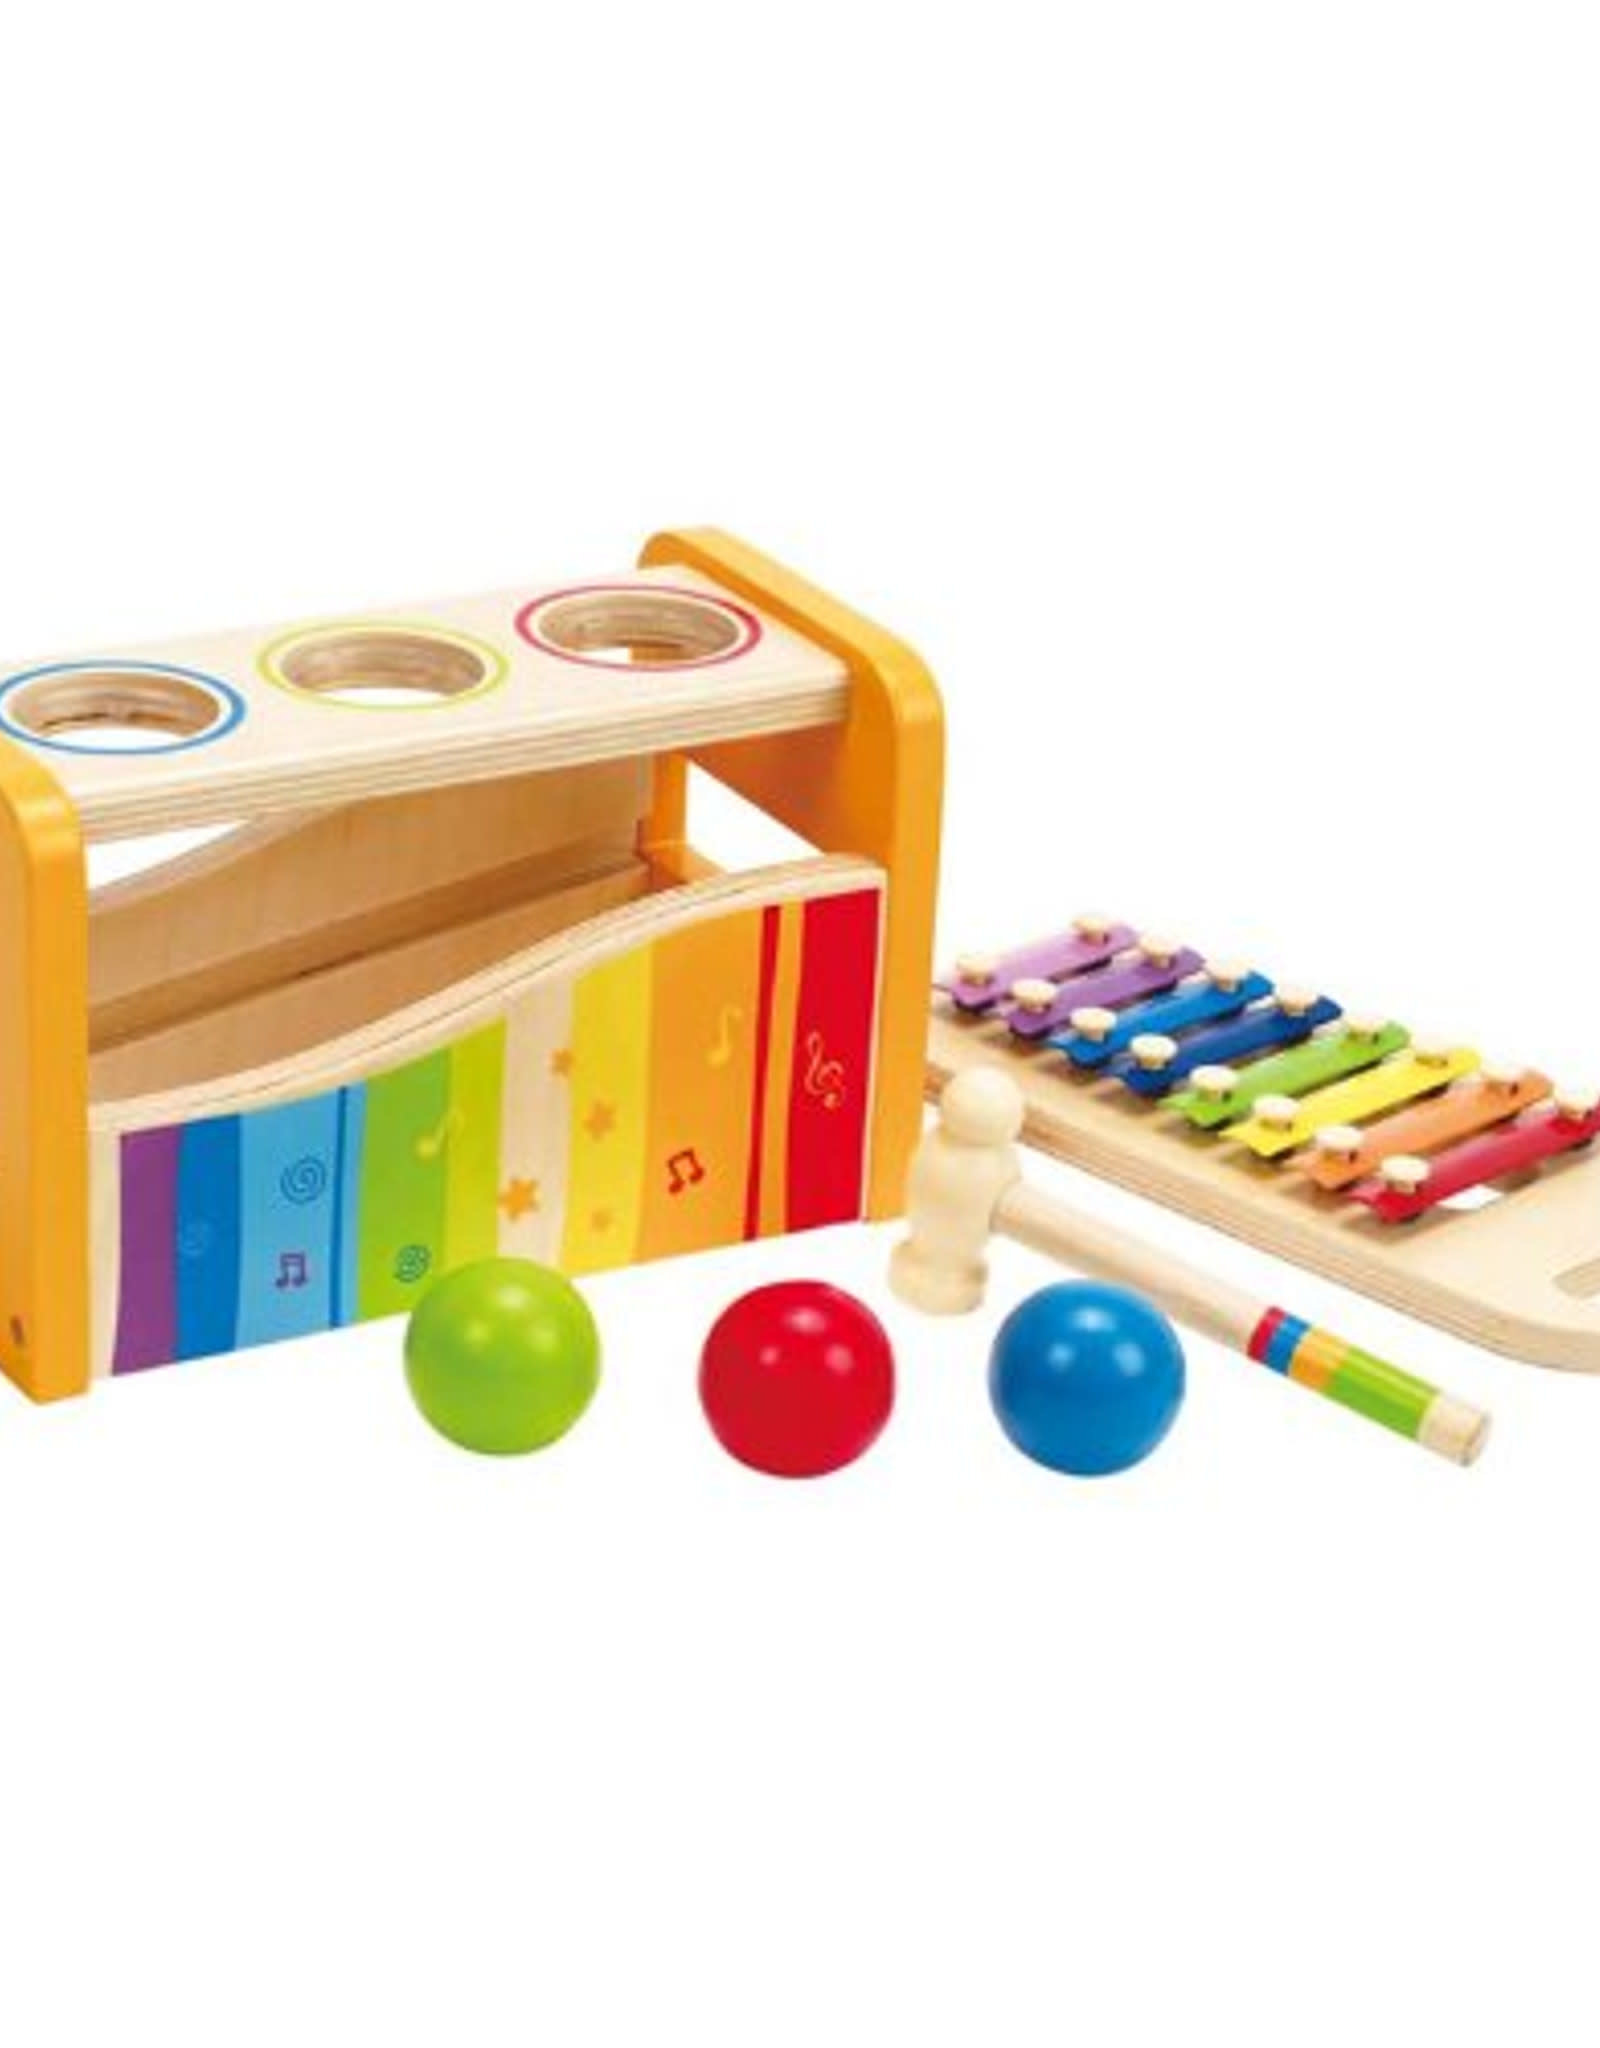 HAPE POUND AND TAP BENCH